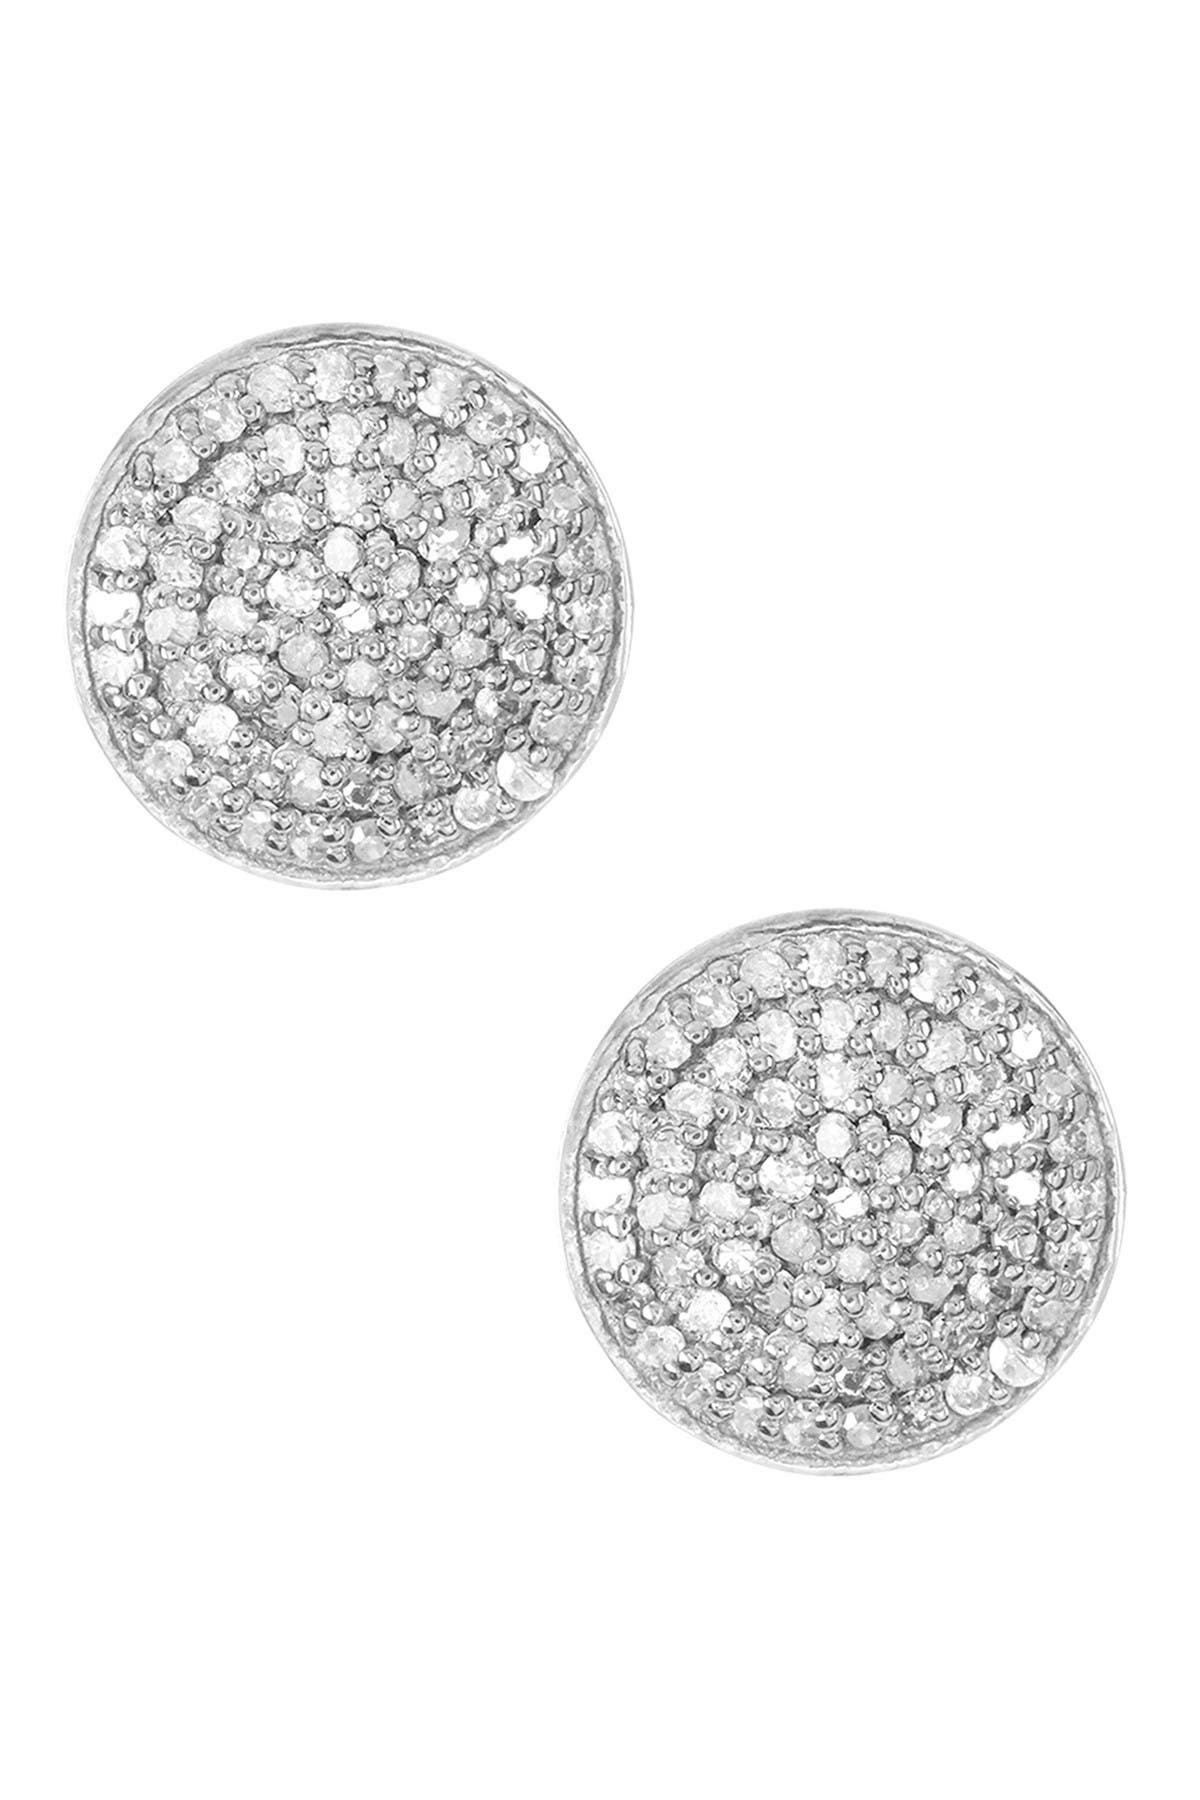 Adornia Fine Rhodium Plated Sterling Silver Pave Diamond Disc Stud Earrings